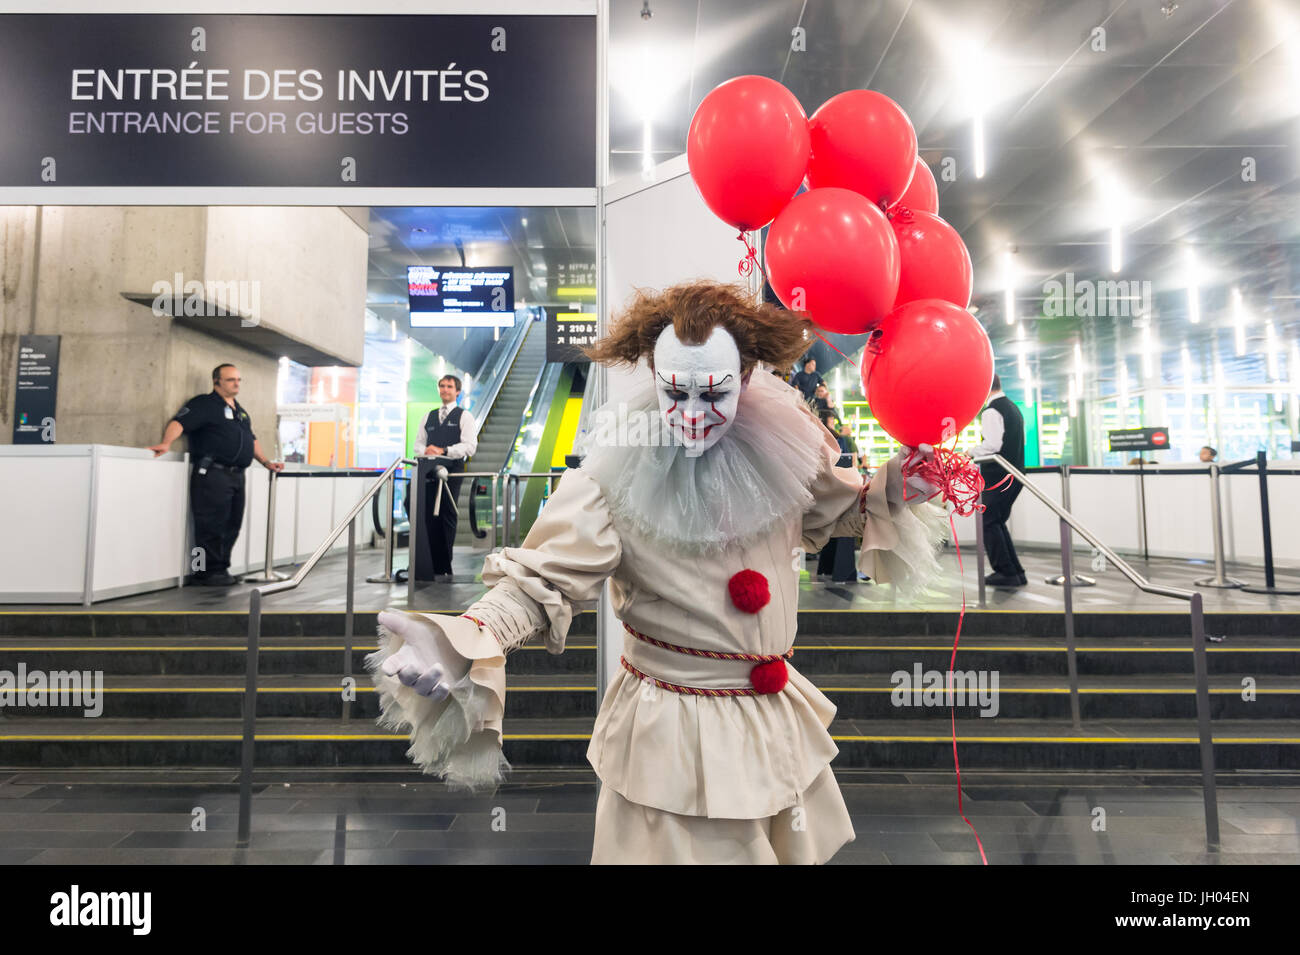 Montreal, Canada - 9 July 2017: Scary clown with balloons at Montreal ComicCon 2017. Stock Photo